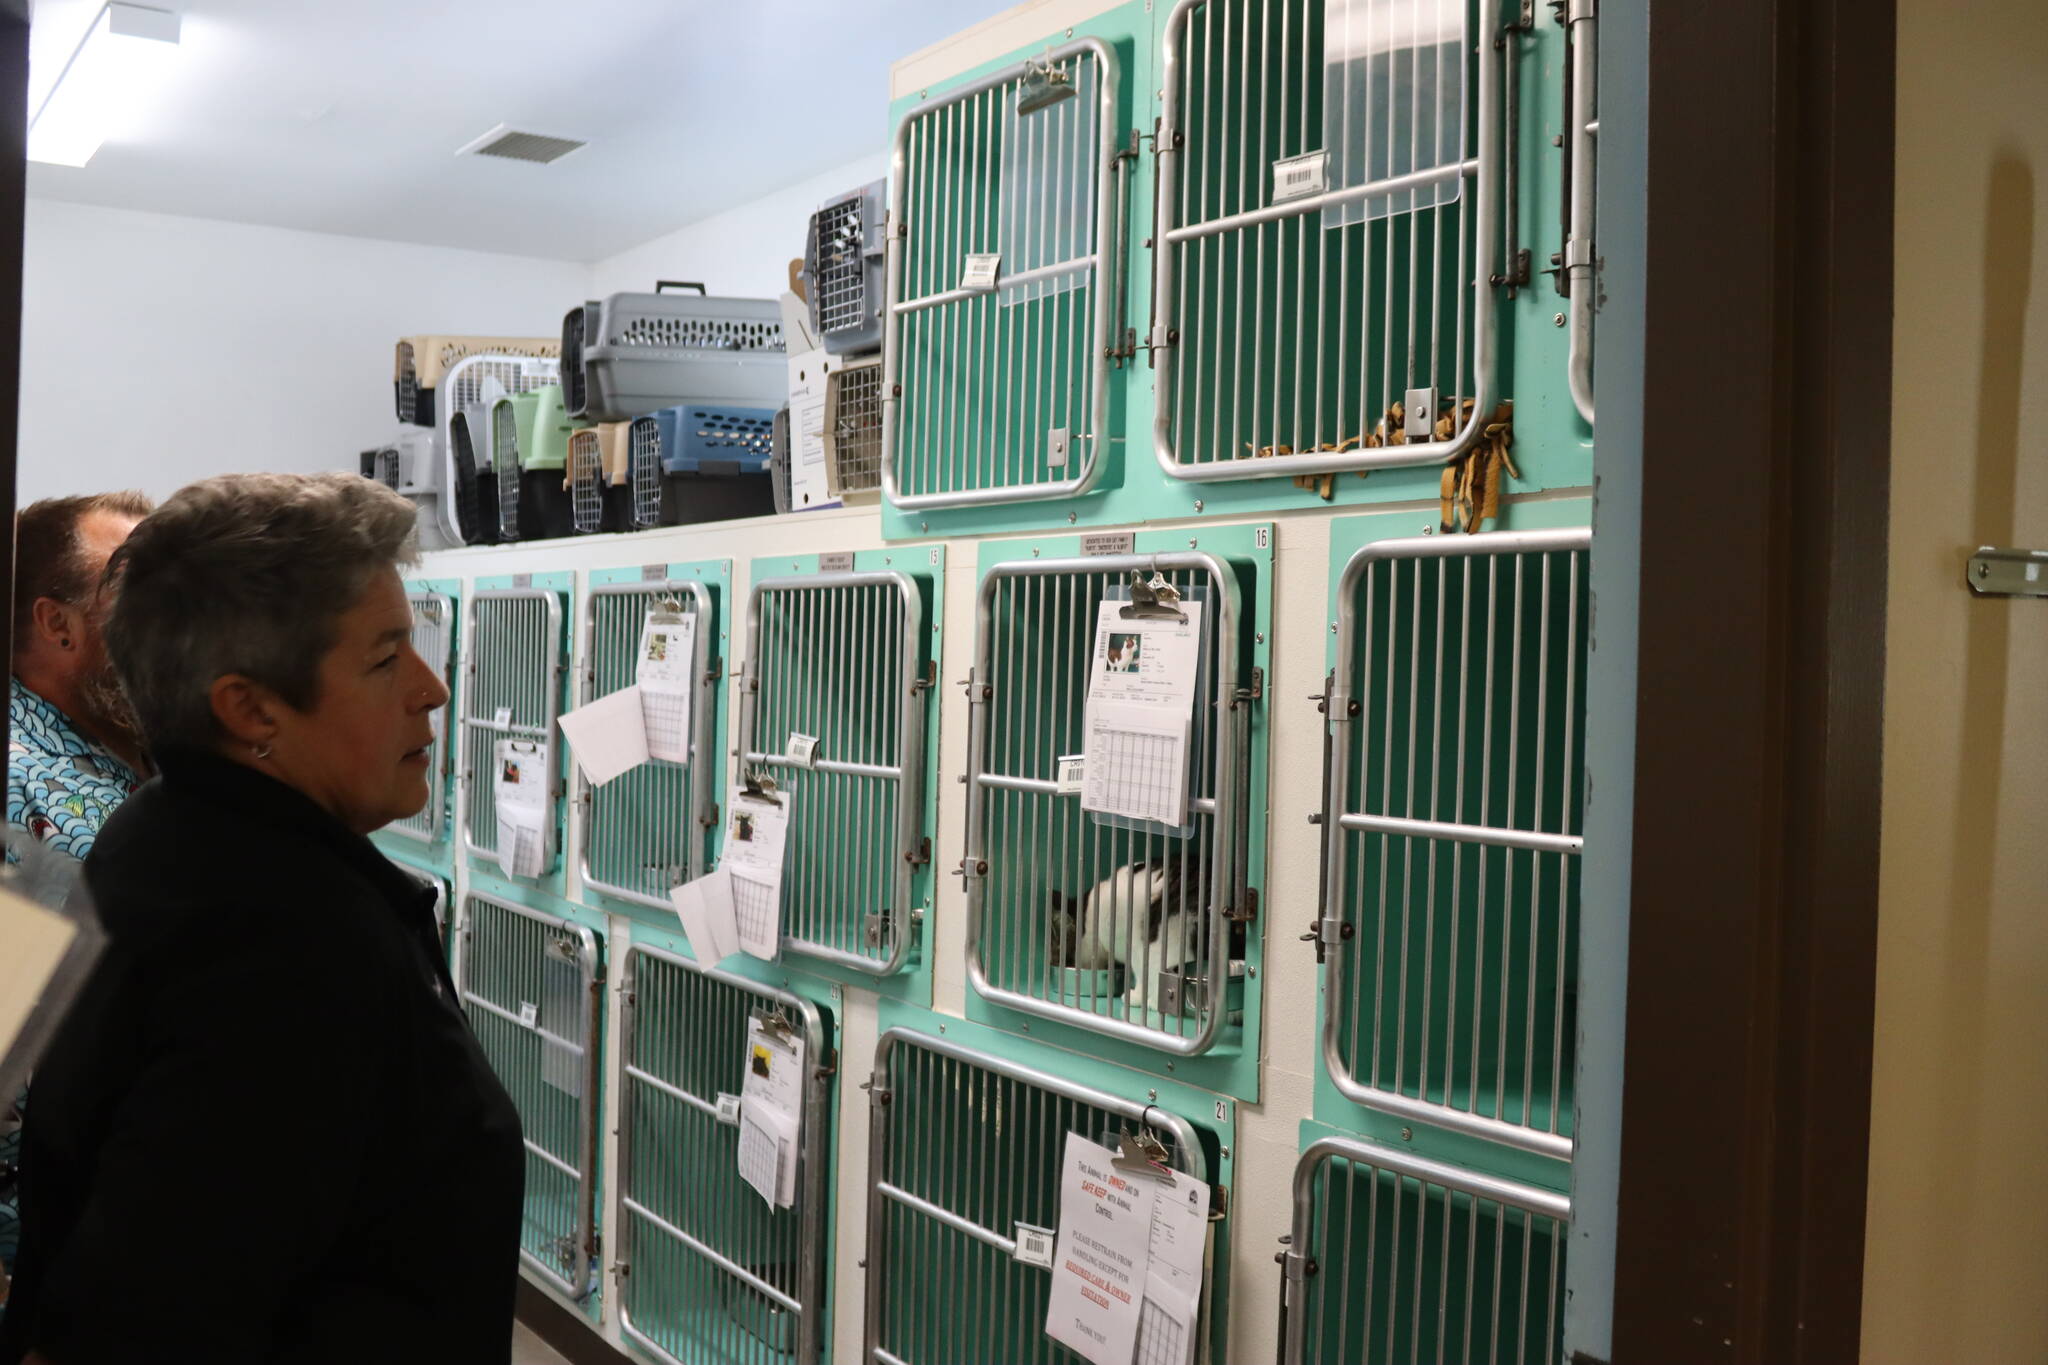 Karen Wood (foreground) animal control director for Juneau Animal Control & Protection, and deputy director Andy Nelson examine cats being kept at the facility on Monday. (Meredith Jordan/ Juneau Empire)